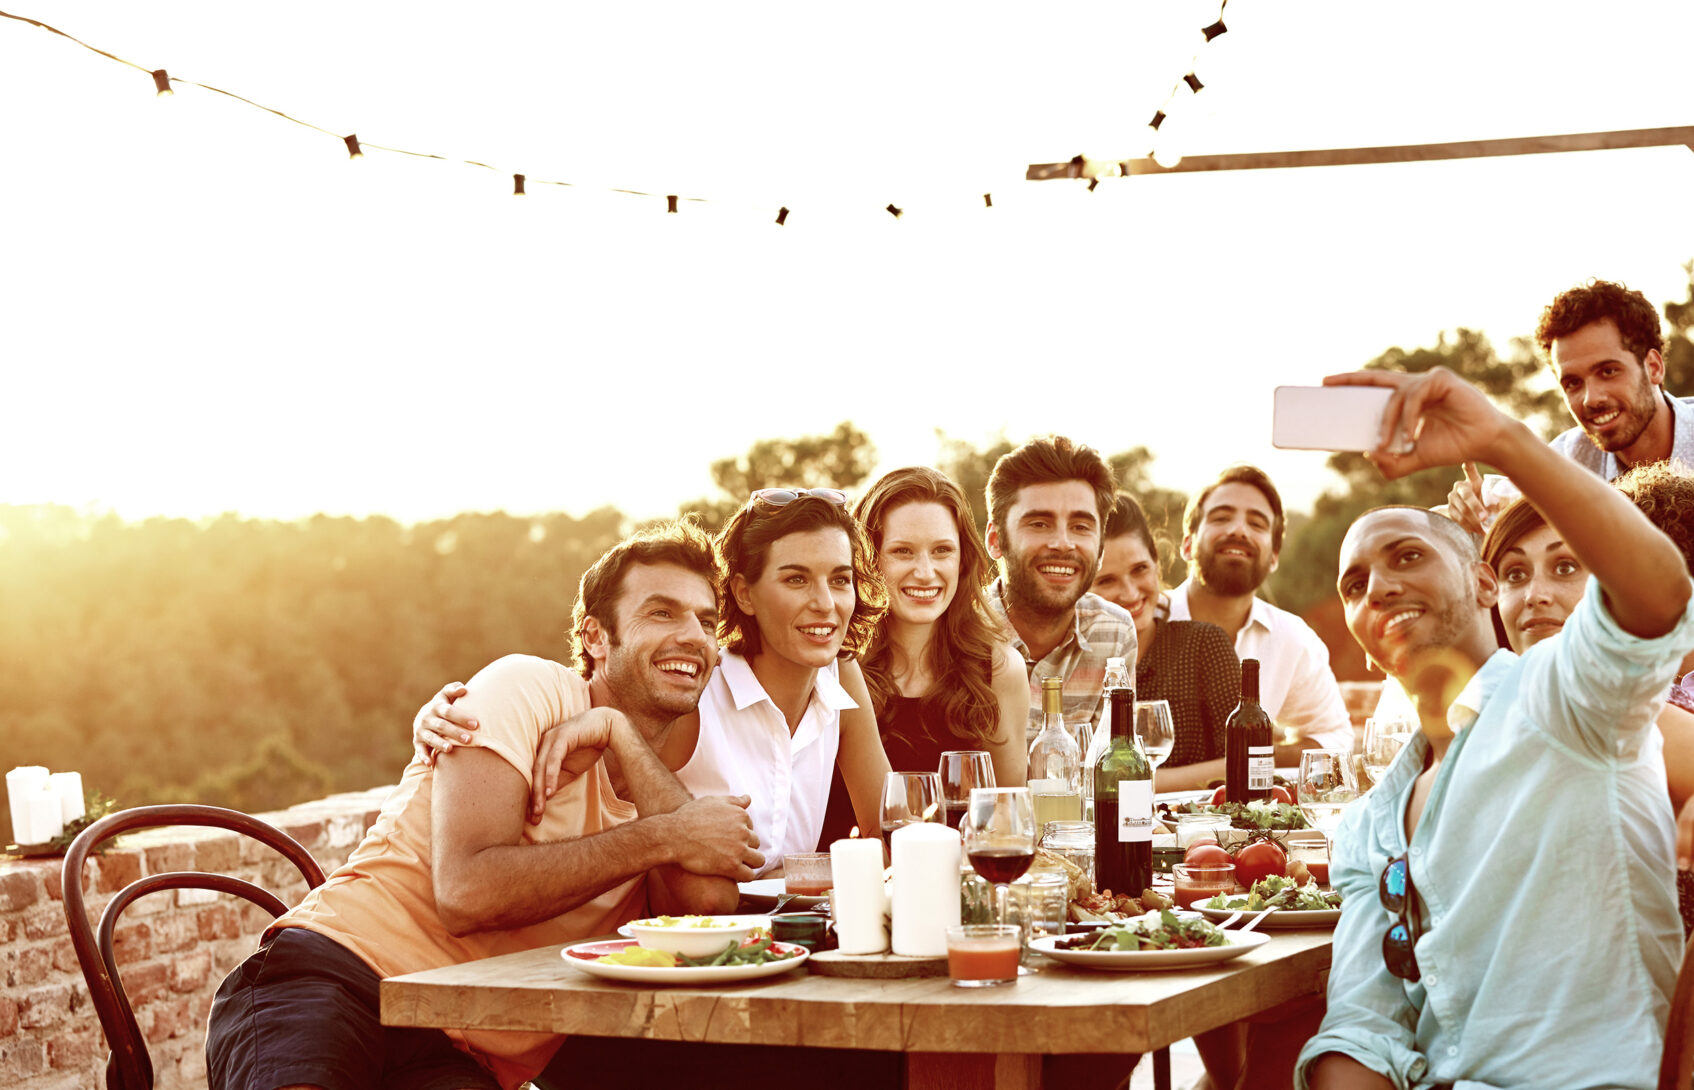 Smiling man taking group selfie on mobile phone at dinner party